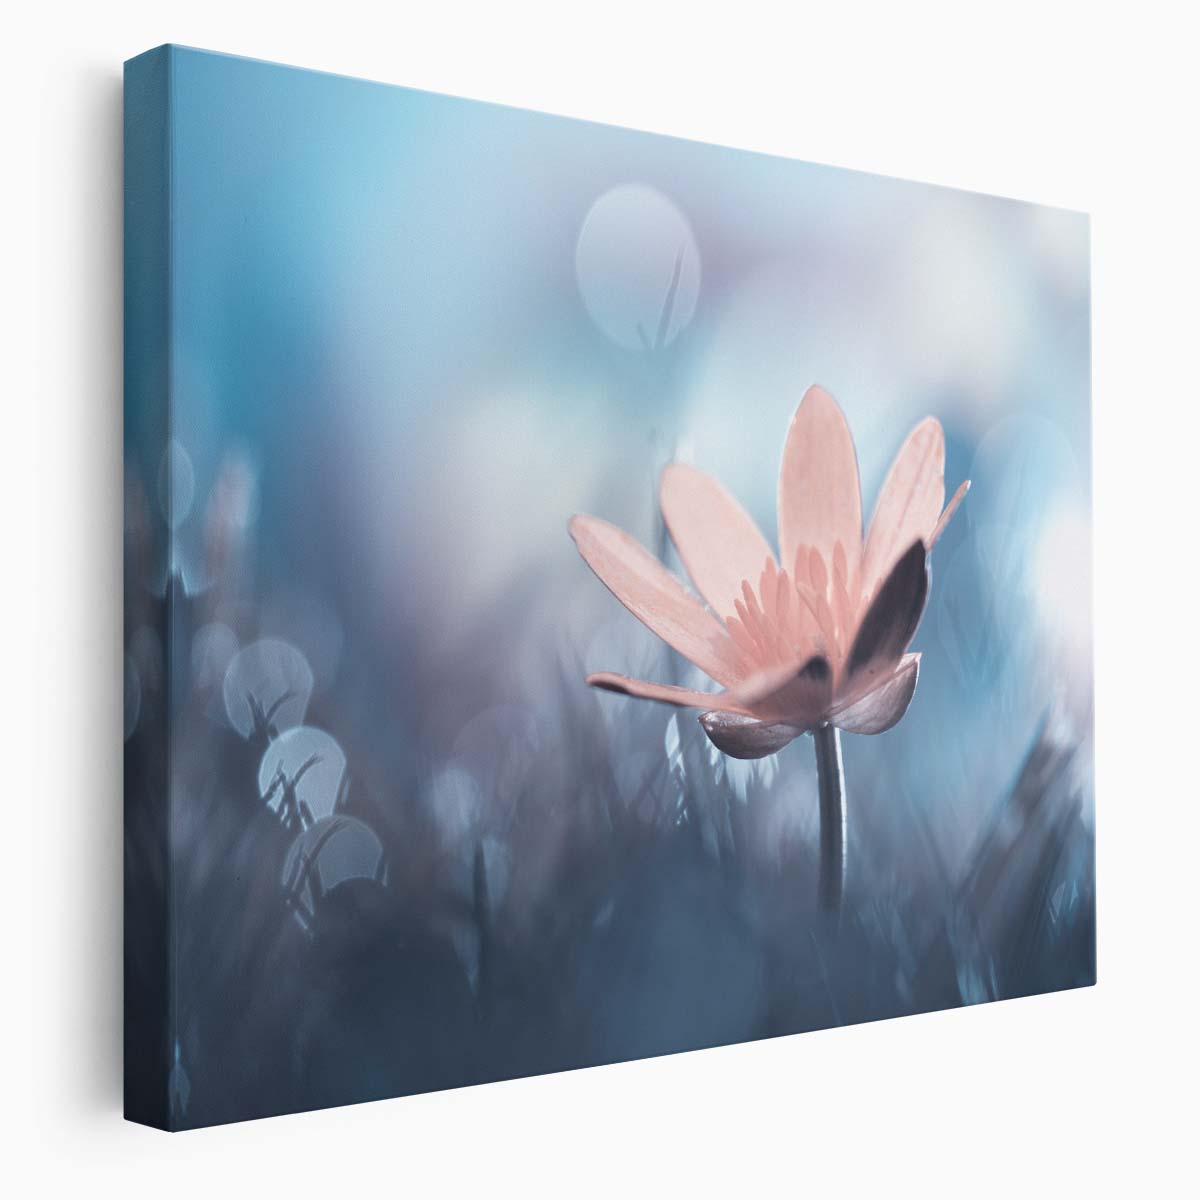 Pastel Pink Blossom Macro Floral Bokeh Wall Art by Luxuriance Designs. Made in USA.